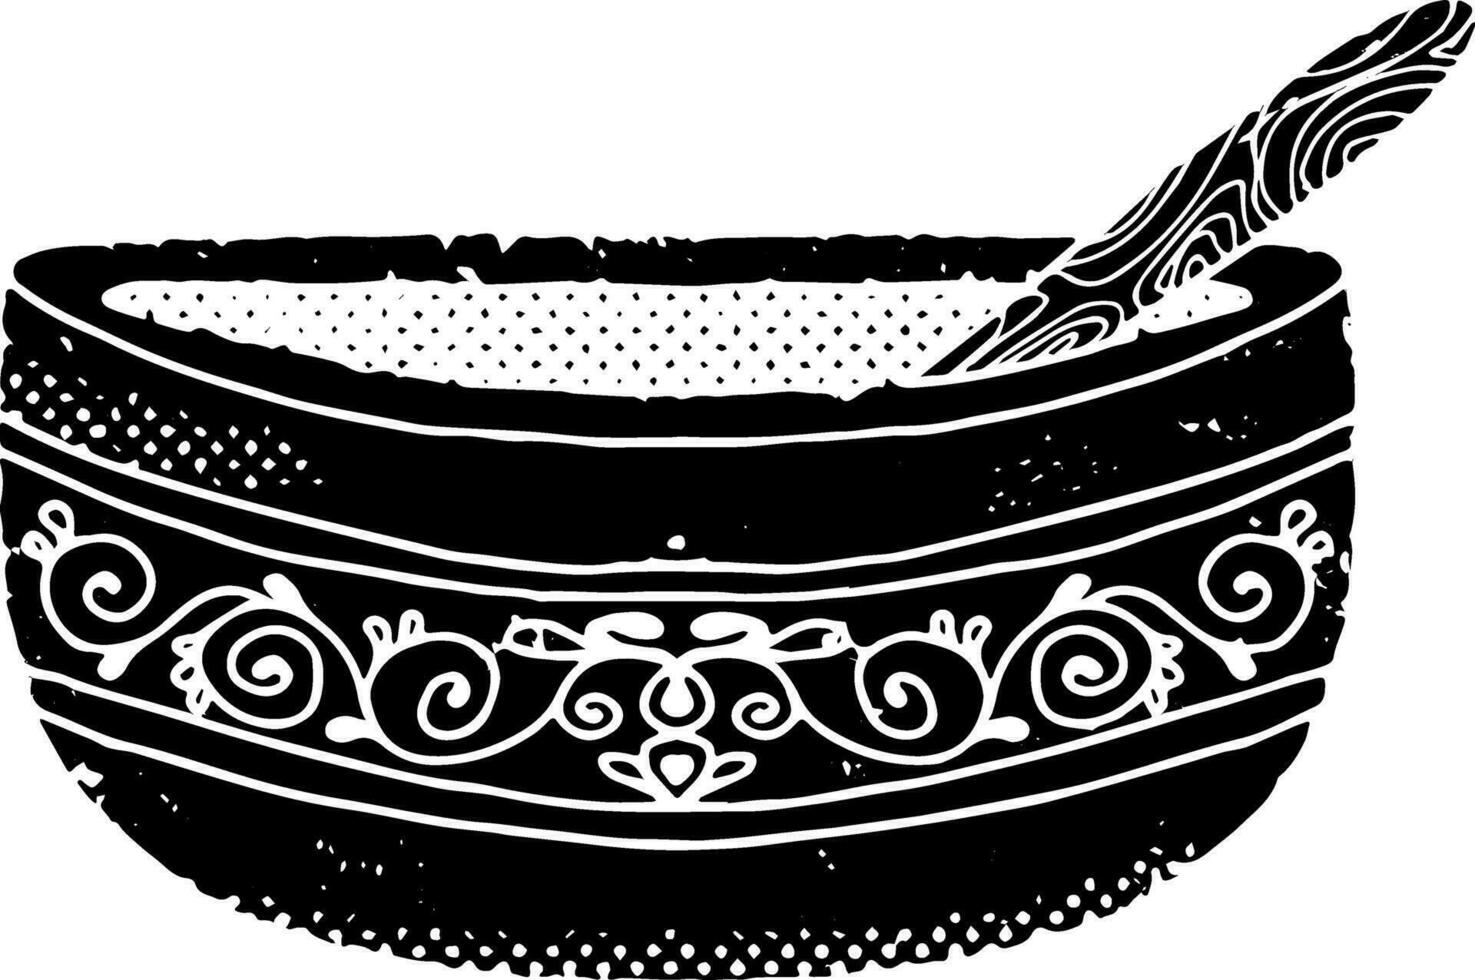 a black and white illustration of a bowl with a spoon vector